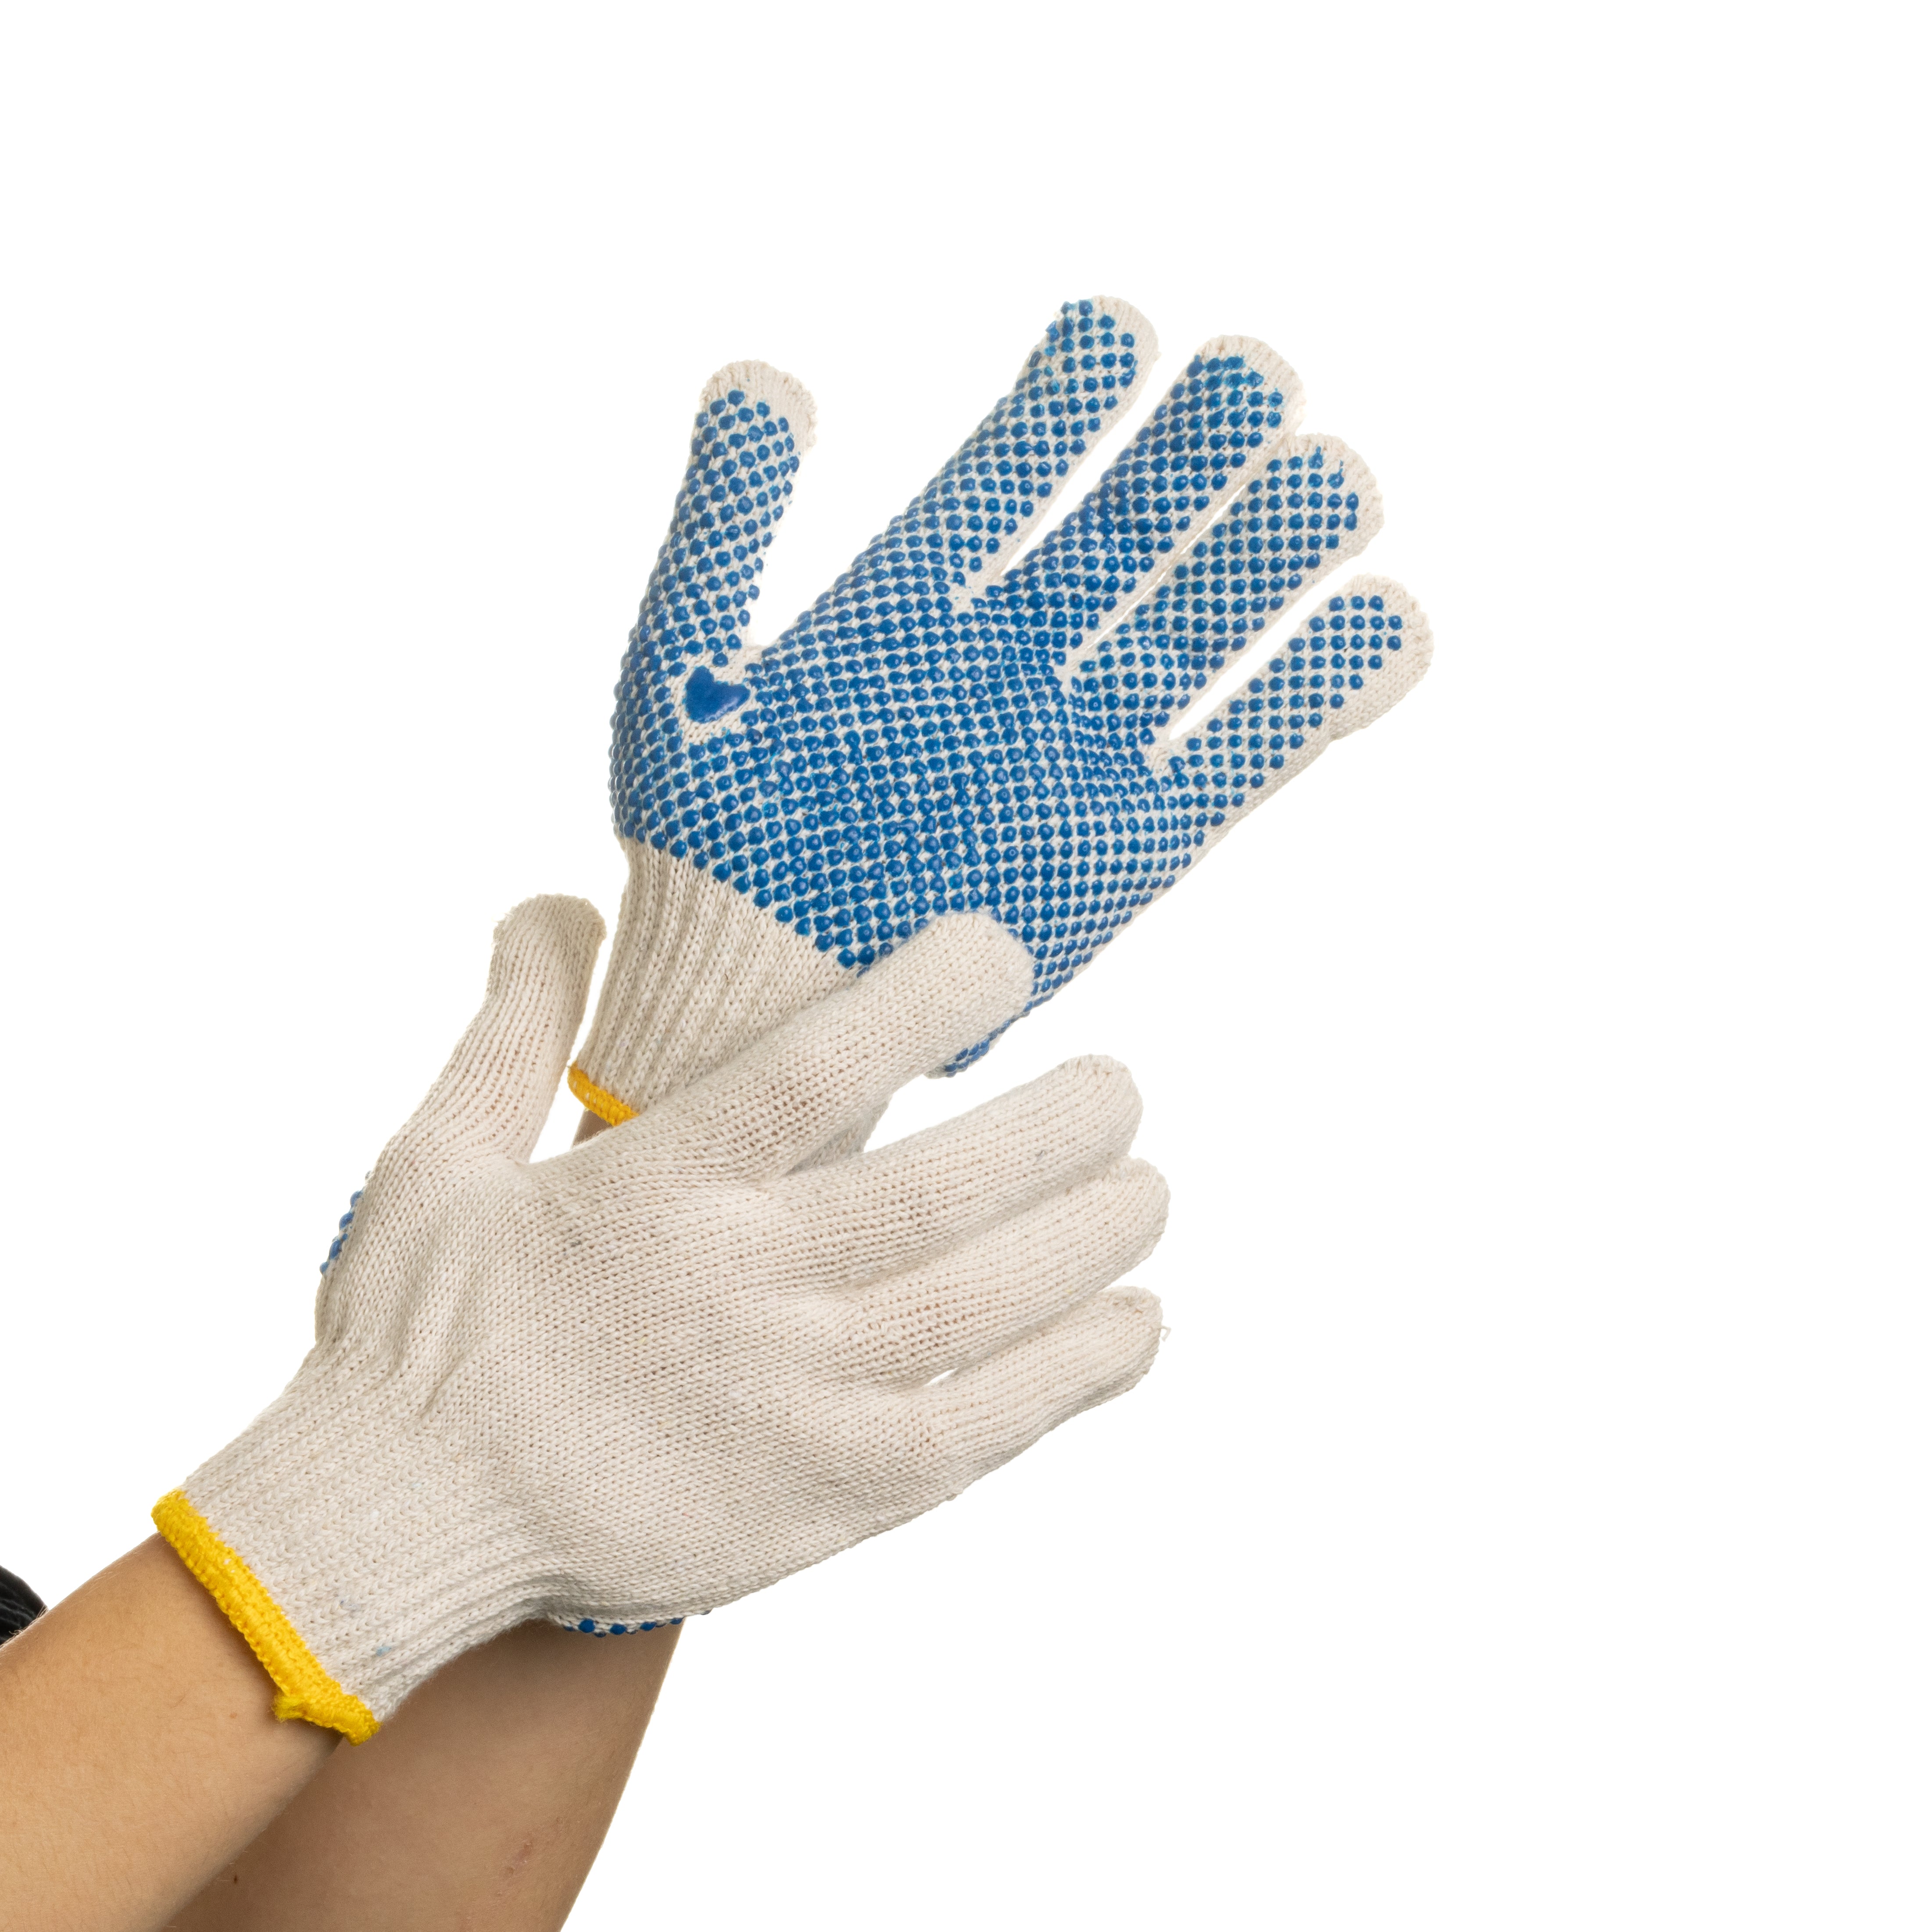 PVC-Dotted Cotton/Polyester Work Gloves, Large, Gray/Black, 12 Pairs -  Zerbee